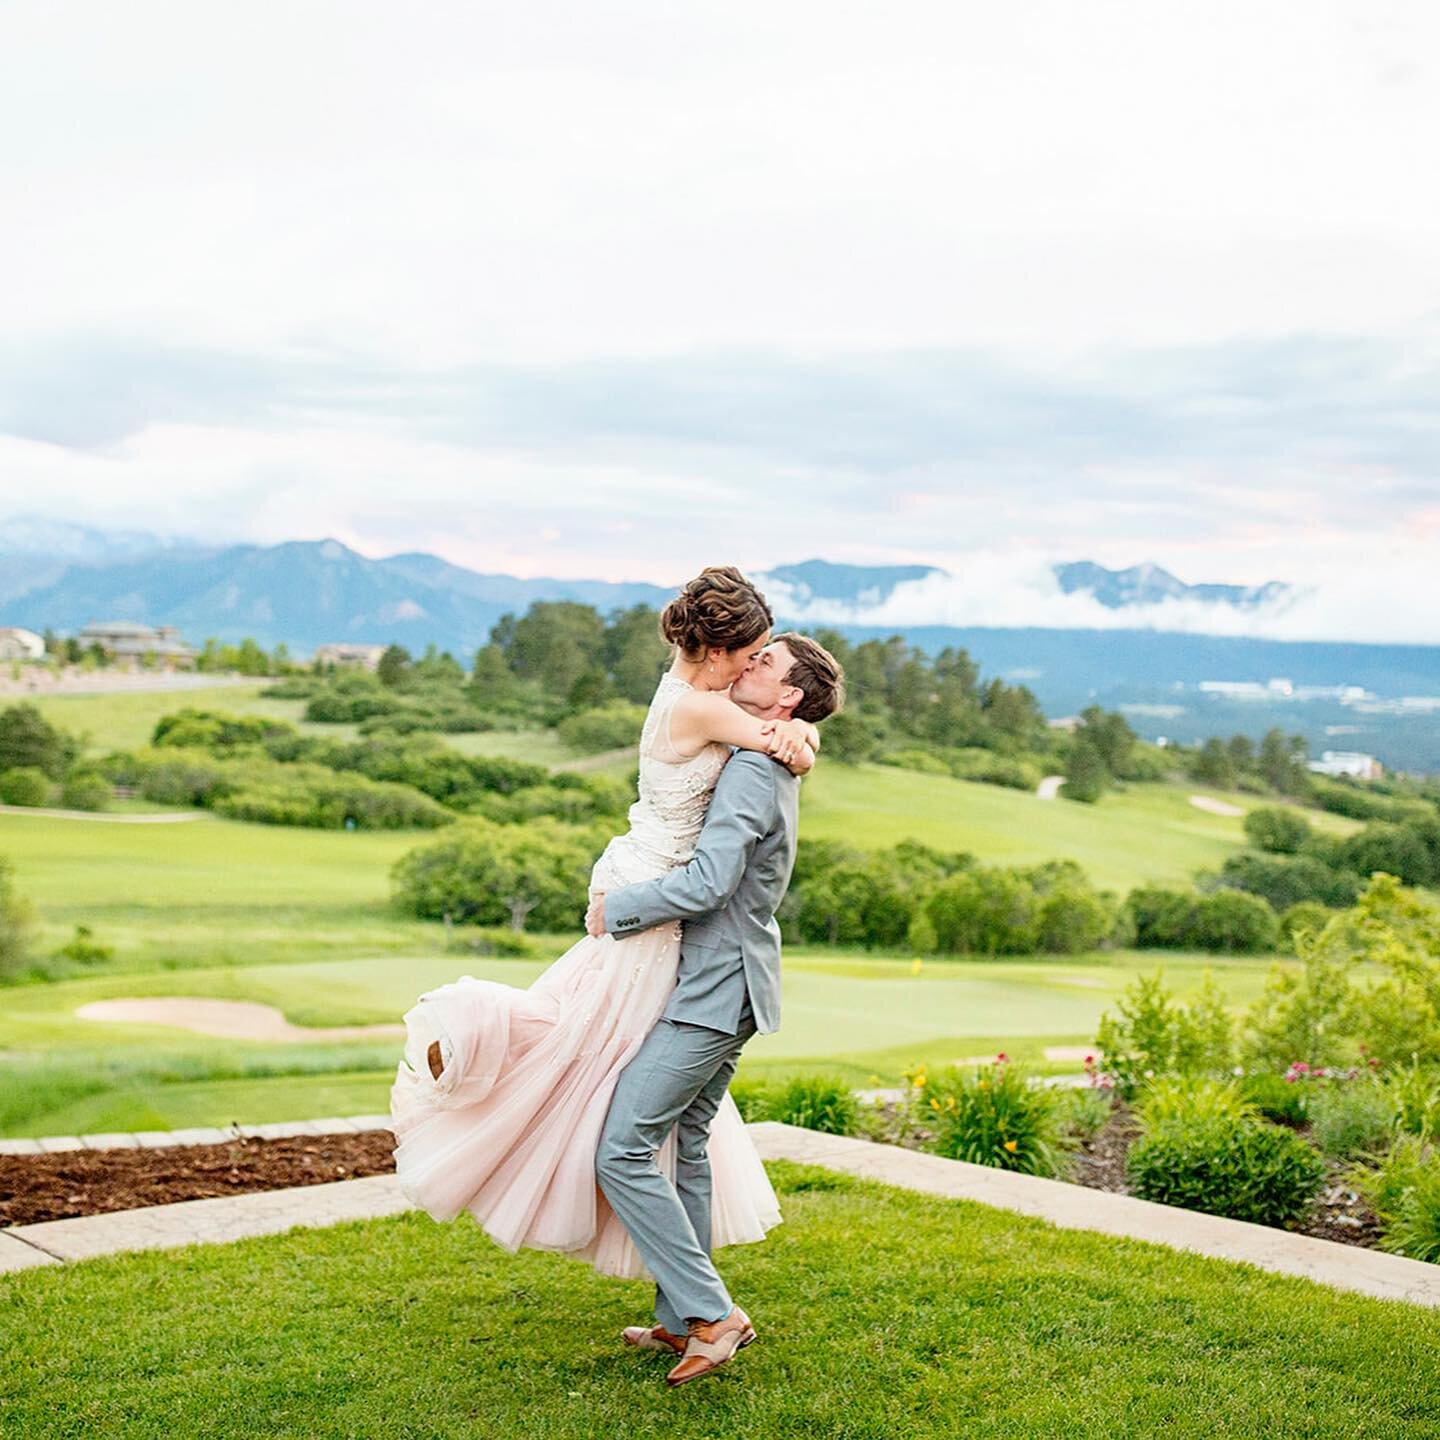 I&rsquo;m feeling like a walk down memory lane lately! Join me for a peek at Jerry + Allison&rsquo;s beautiful weekend in Colorado Springs, Colorado! ⛰ I can&rsquo;t get over the views and how fun this bunch was to spend the day with ☺️

#coloradoelo